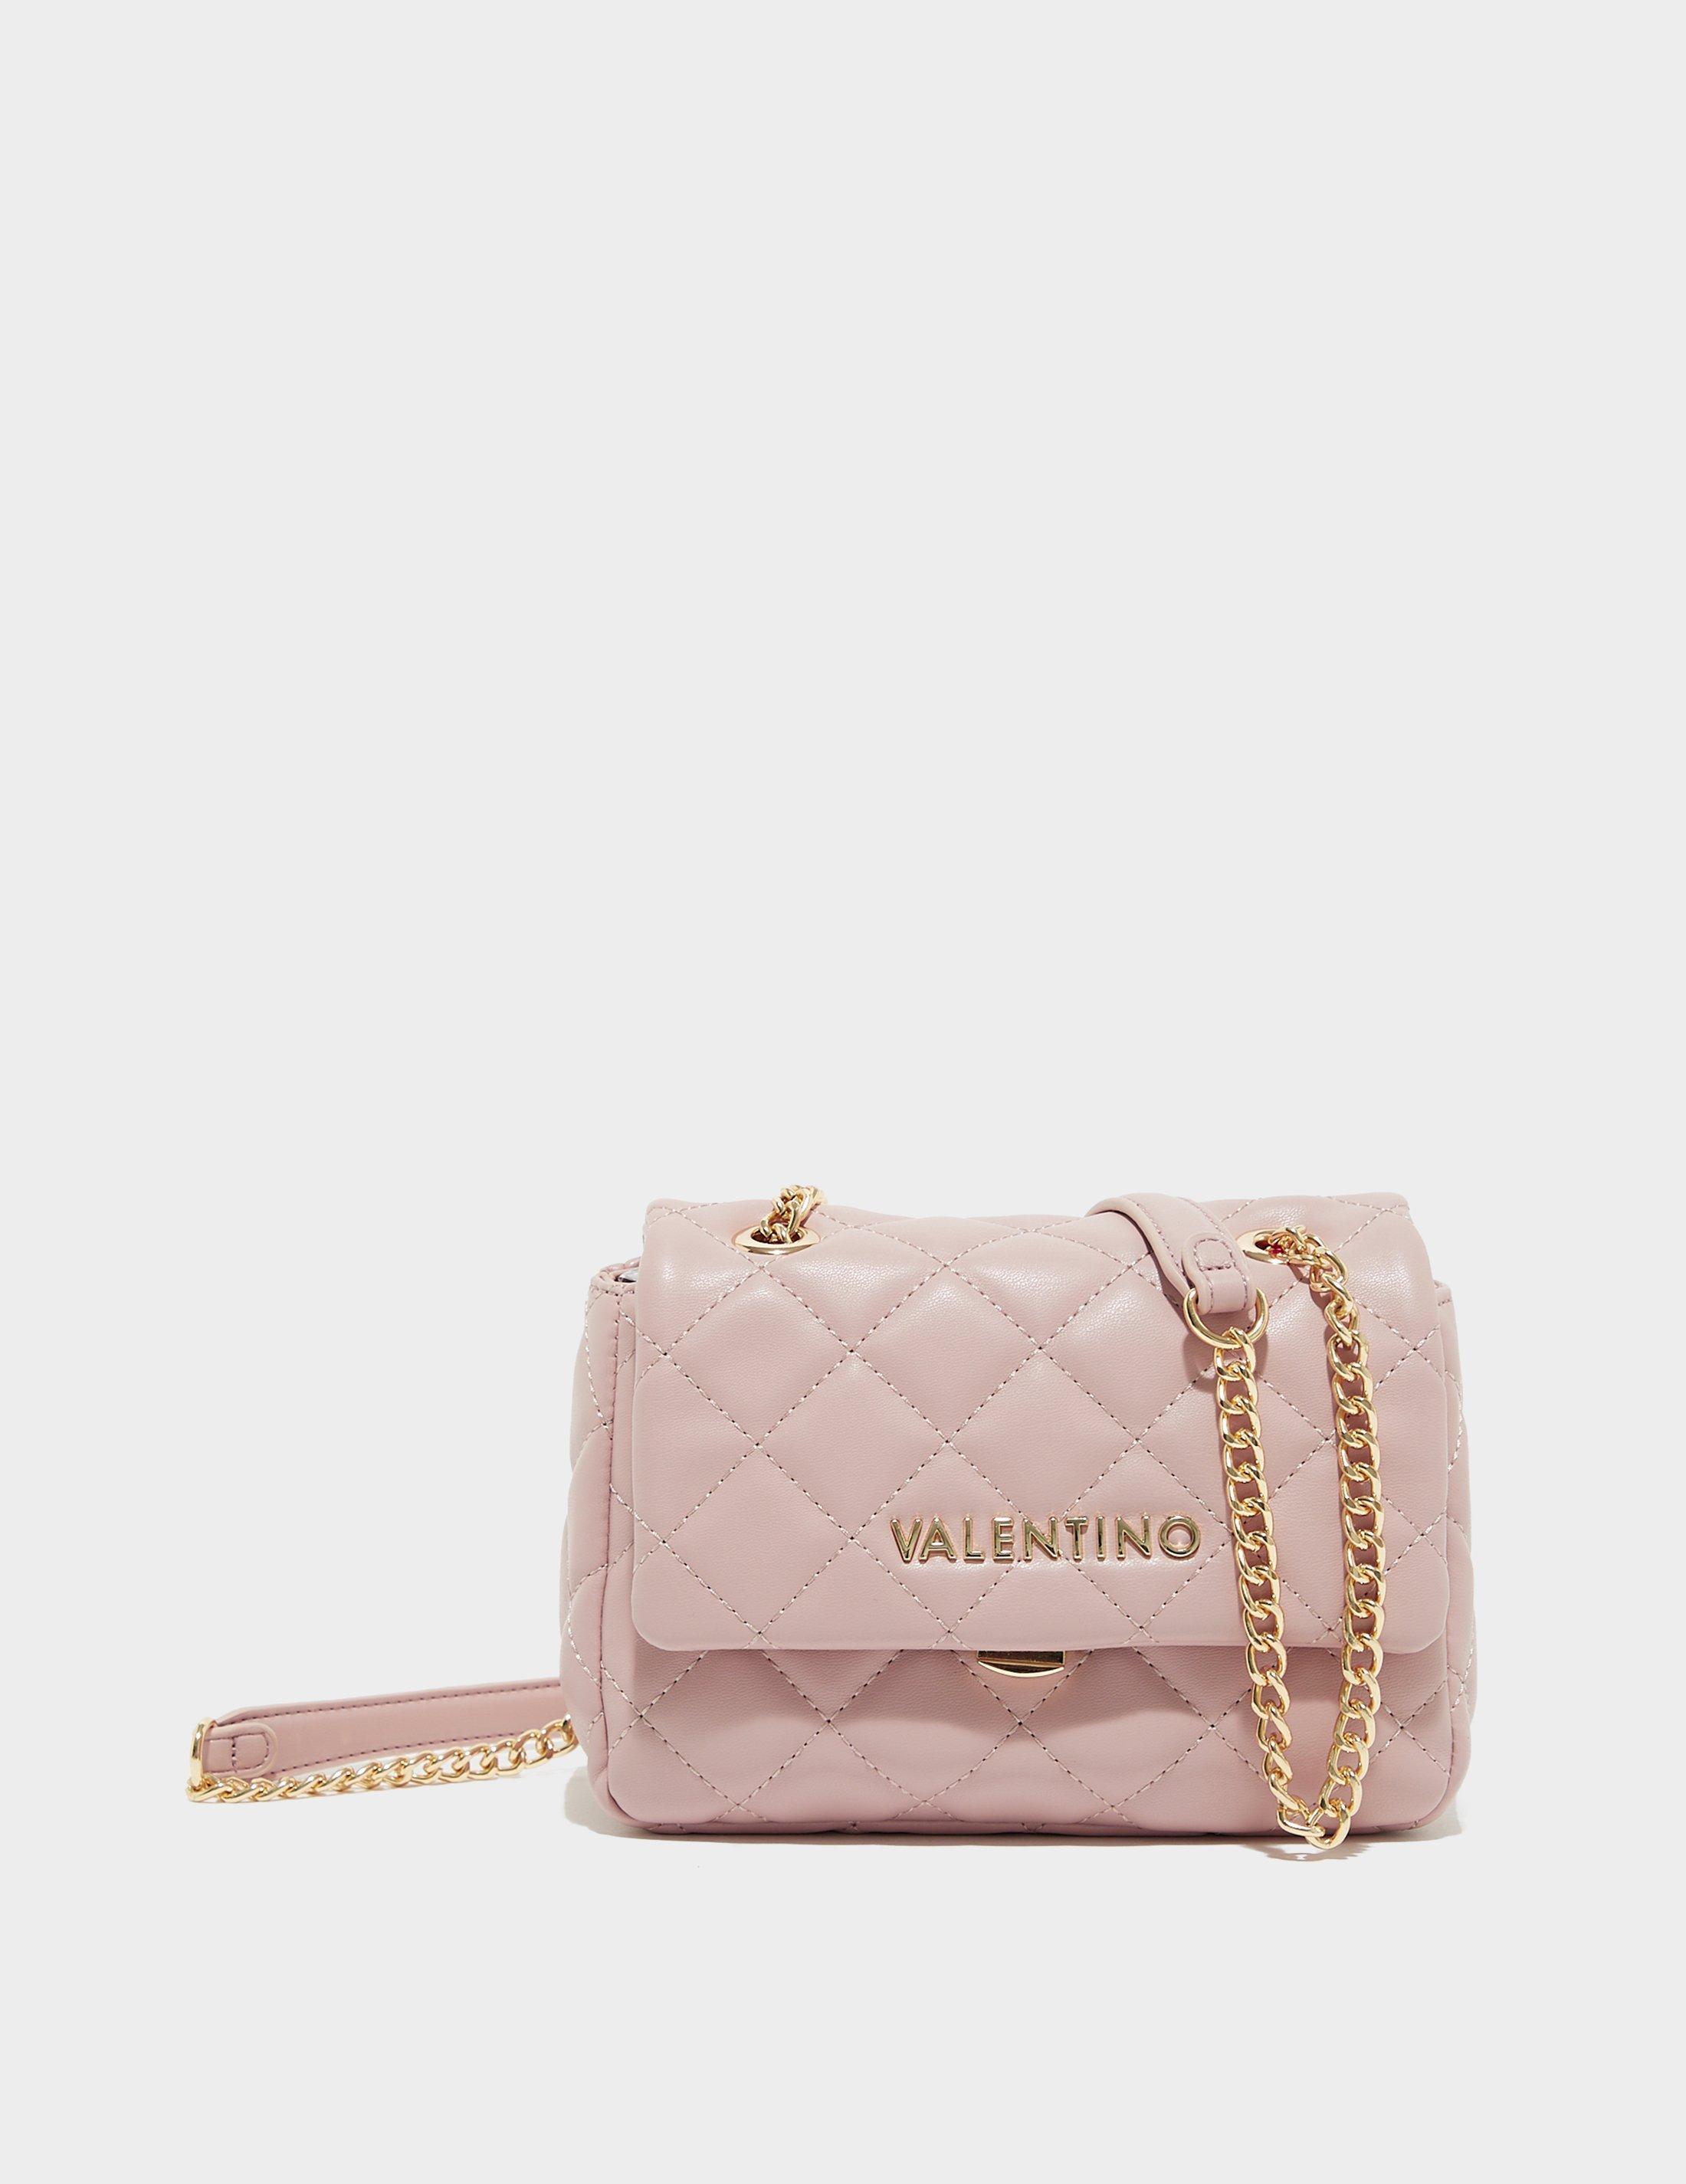 Valentino By Mario Valentino Ocarina Quilted Shoulder Bag Pink - Lyst